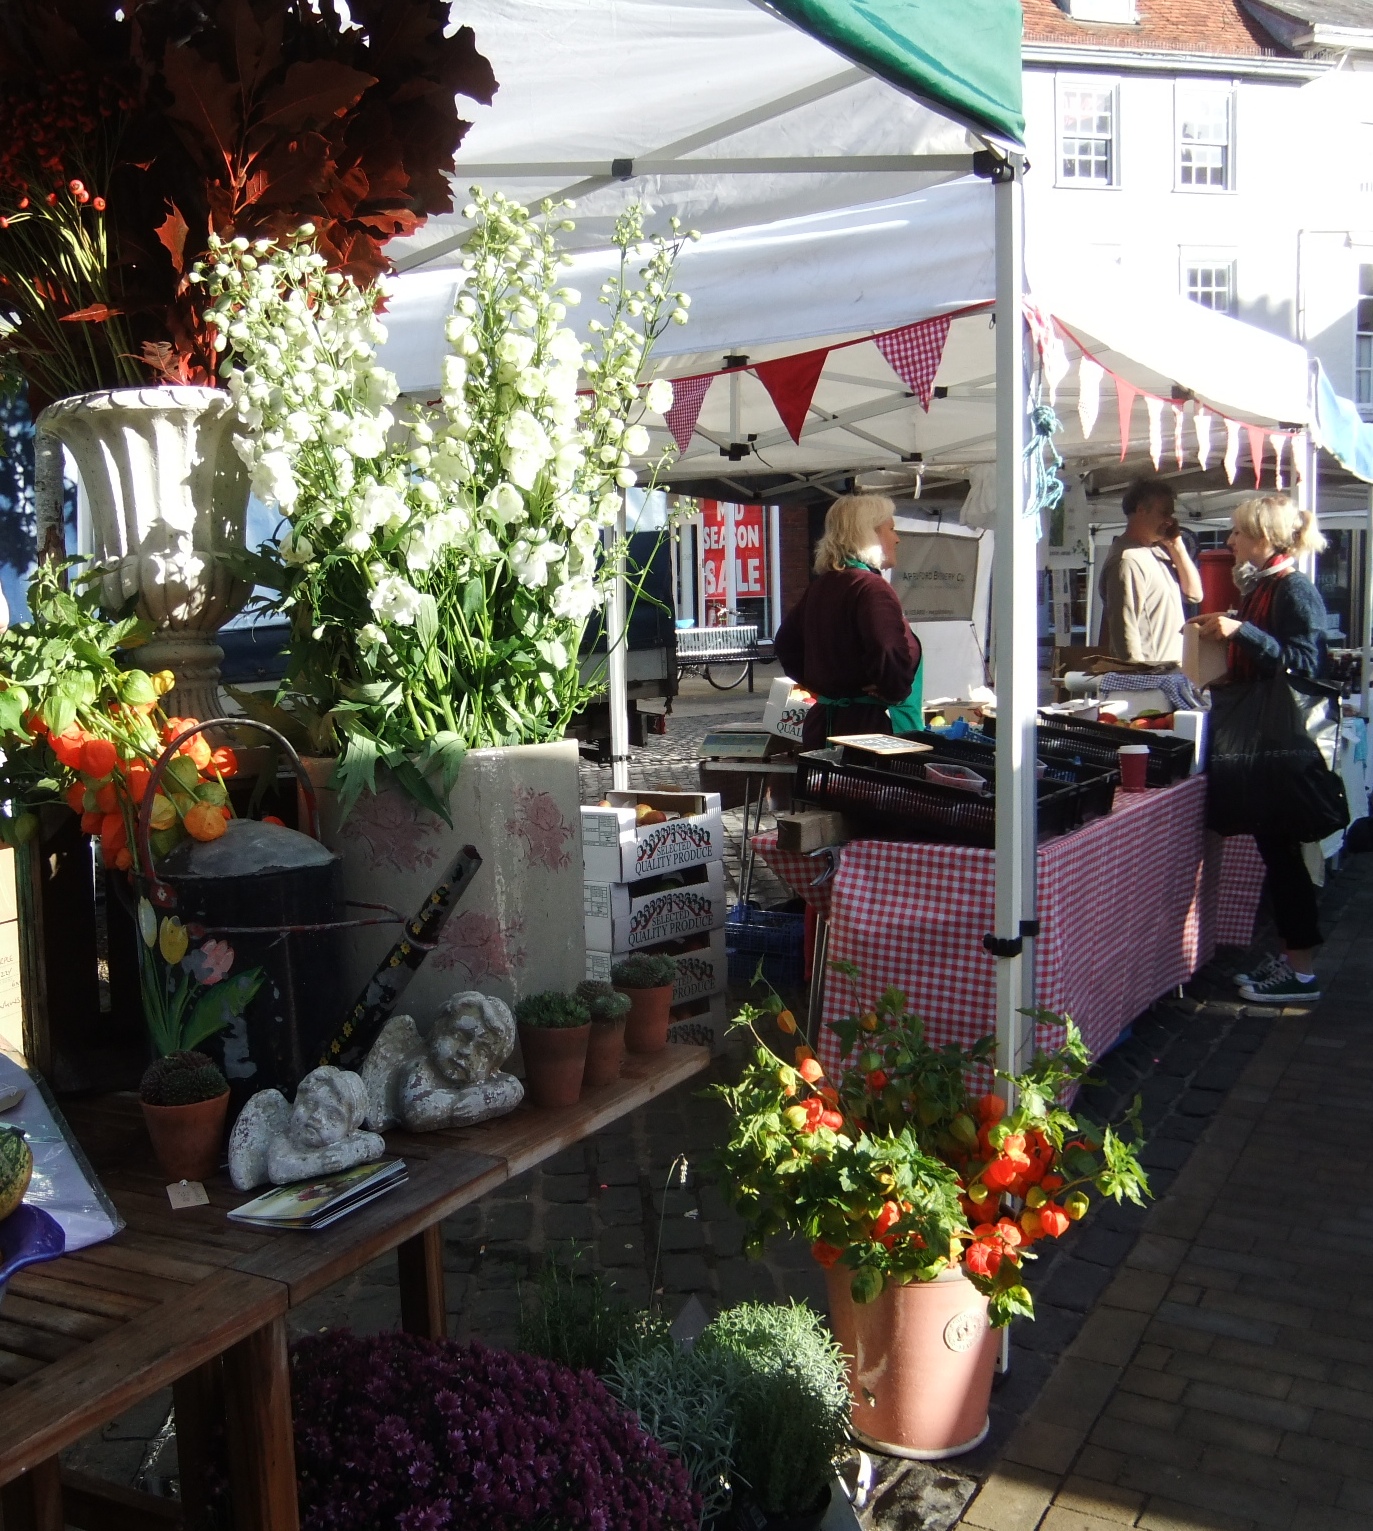 Abingdon's own Local Excellence Market is back